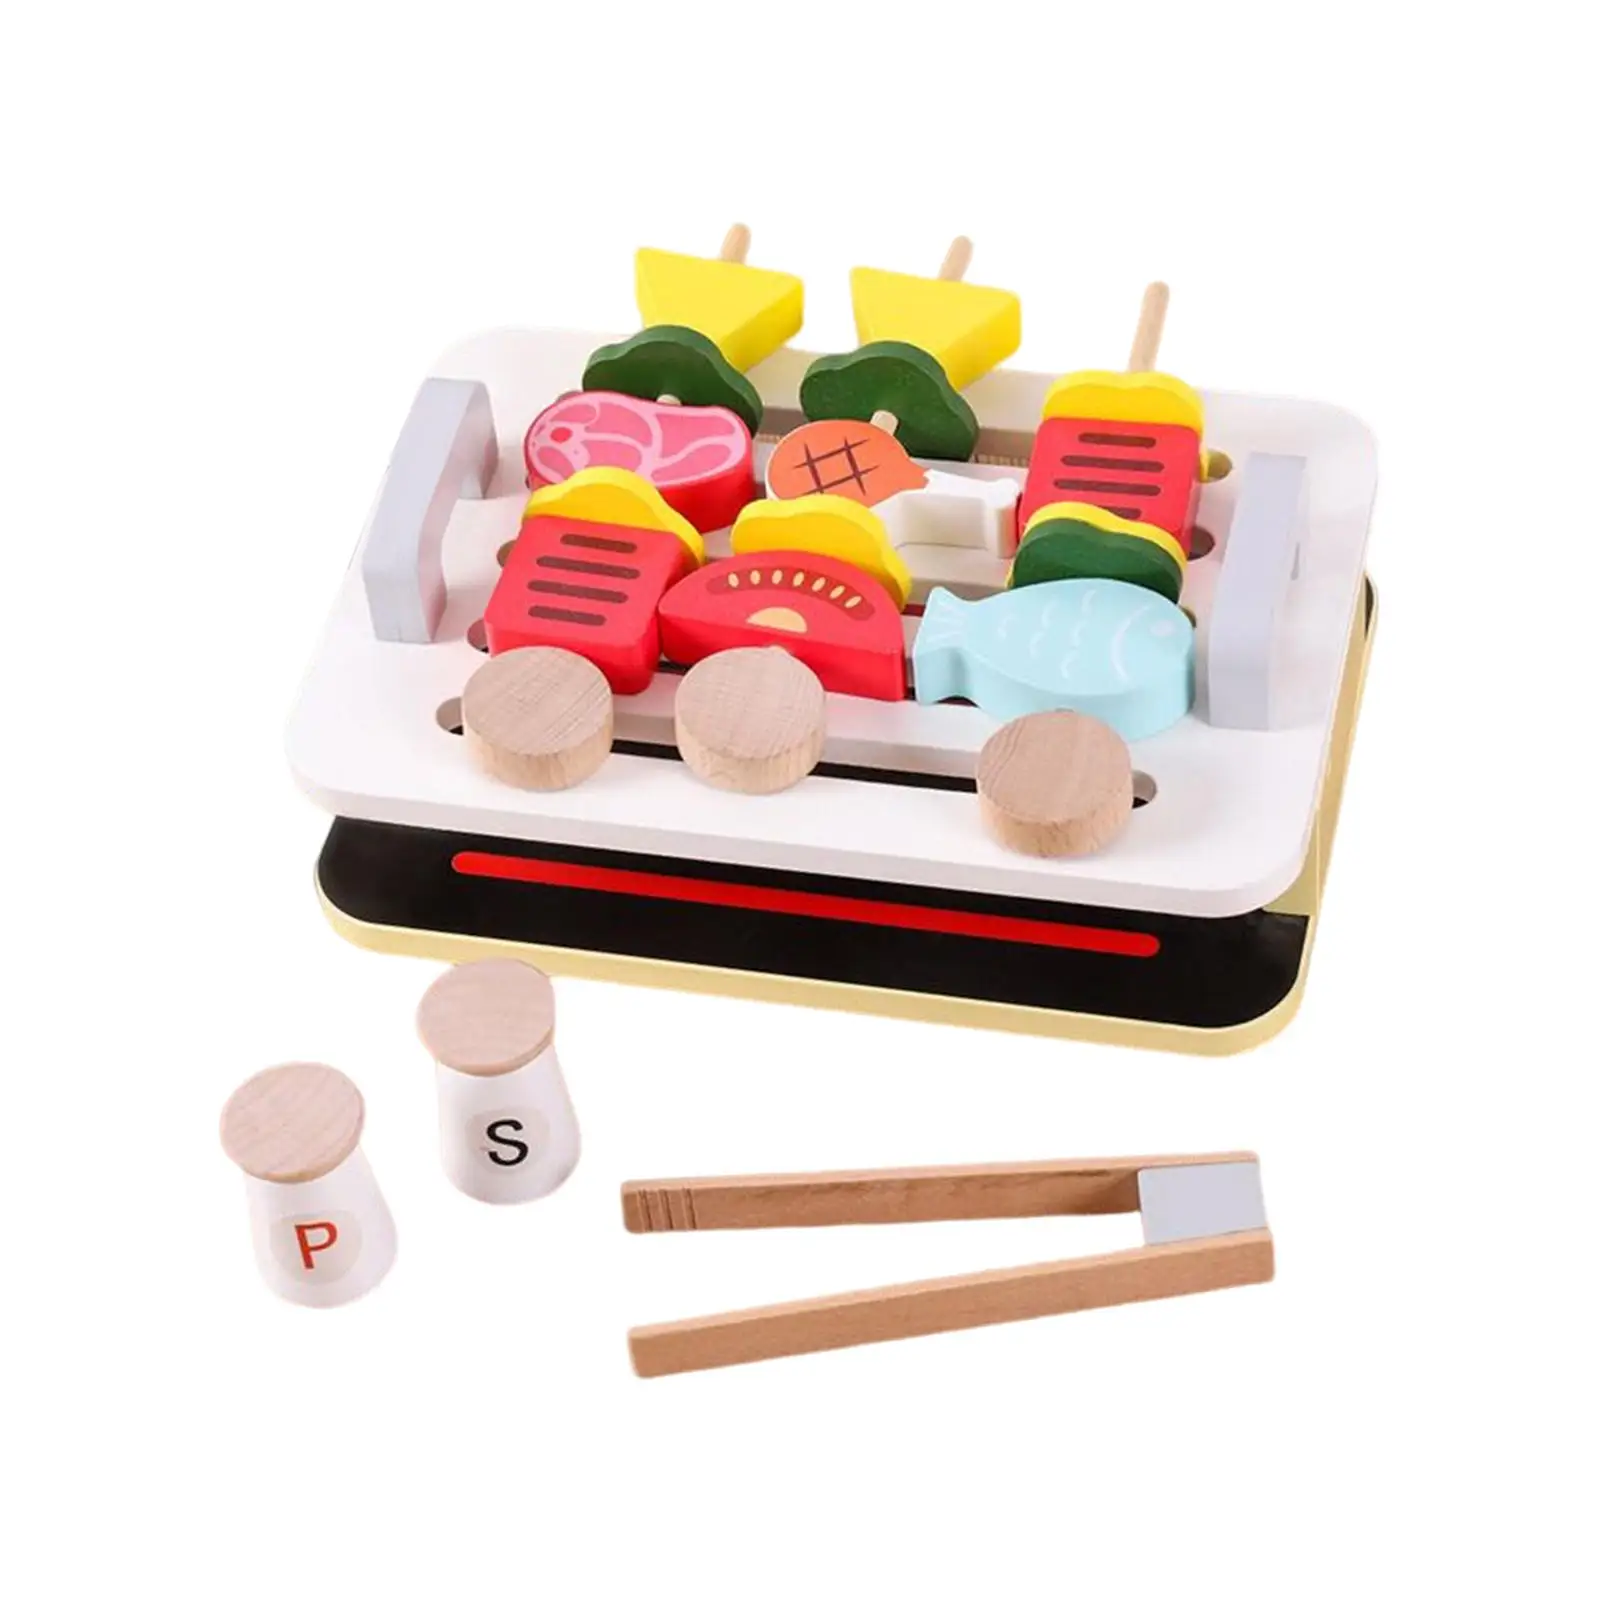 Montessori Grill Playset Toy ,Education Hands on Ability ,Kitchen Toys for Girls Toddlers Kids Preschool Birthday Gifts